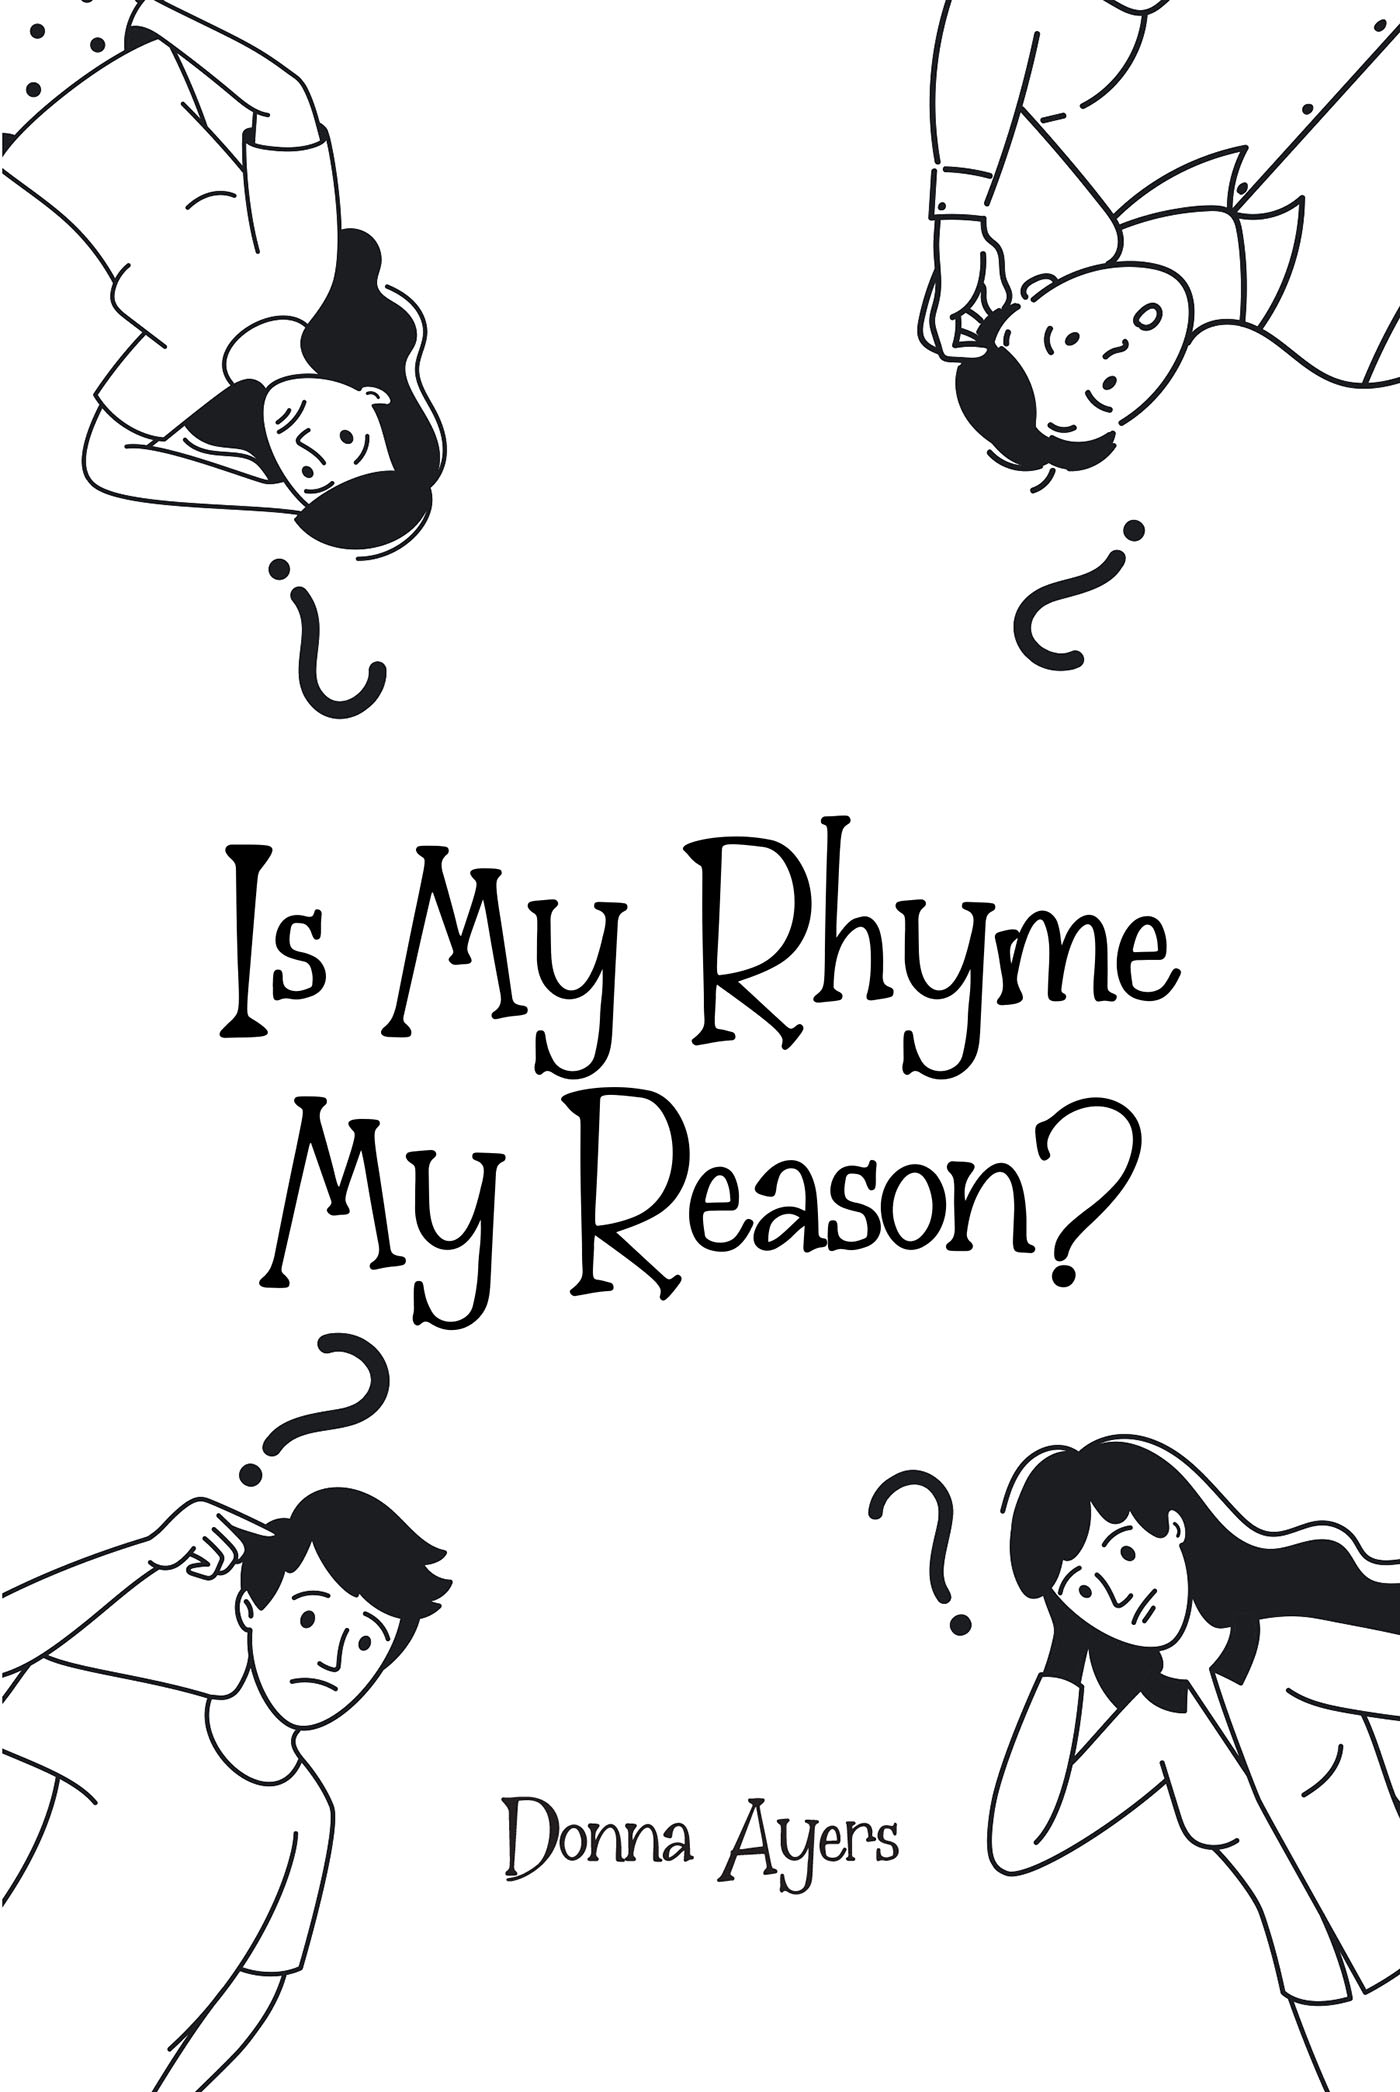 Donna Ayers’s Newly Released “Is My Rhyme My Reason?” is an Engaging Collection of Poetic Works That Bring Readers a Sense of Discovery and Purpose